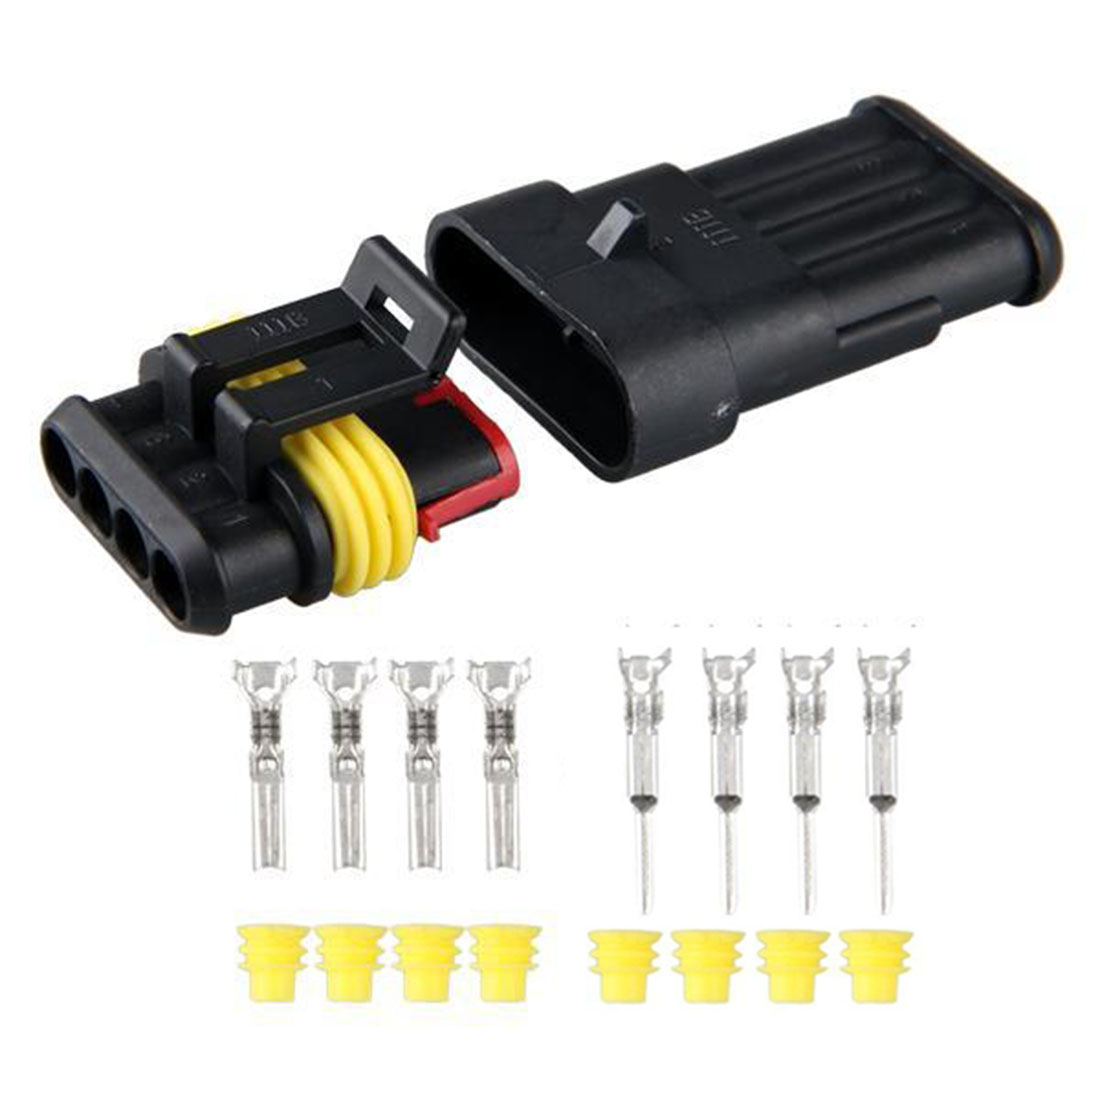 5 Sets Kits 4 Pin Way Waterproof Wire Connector Plug Car Auto Sealed Electrical Set High